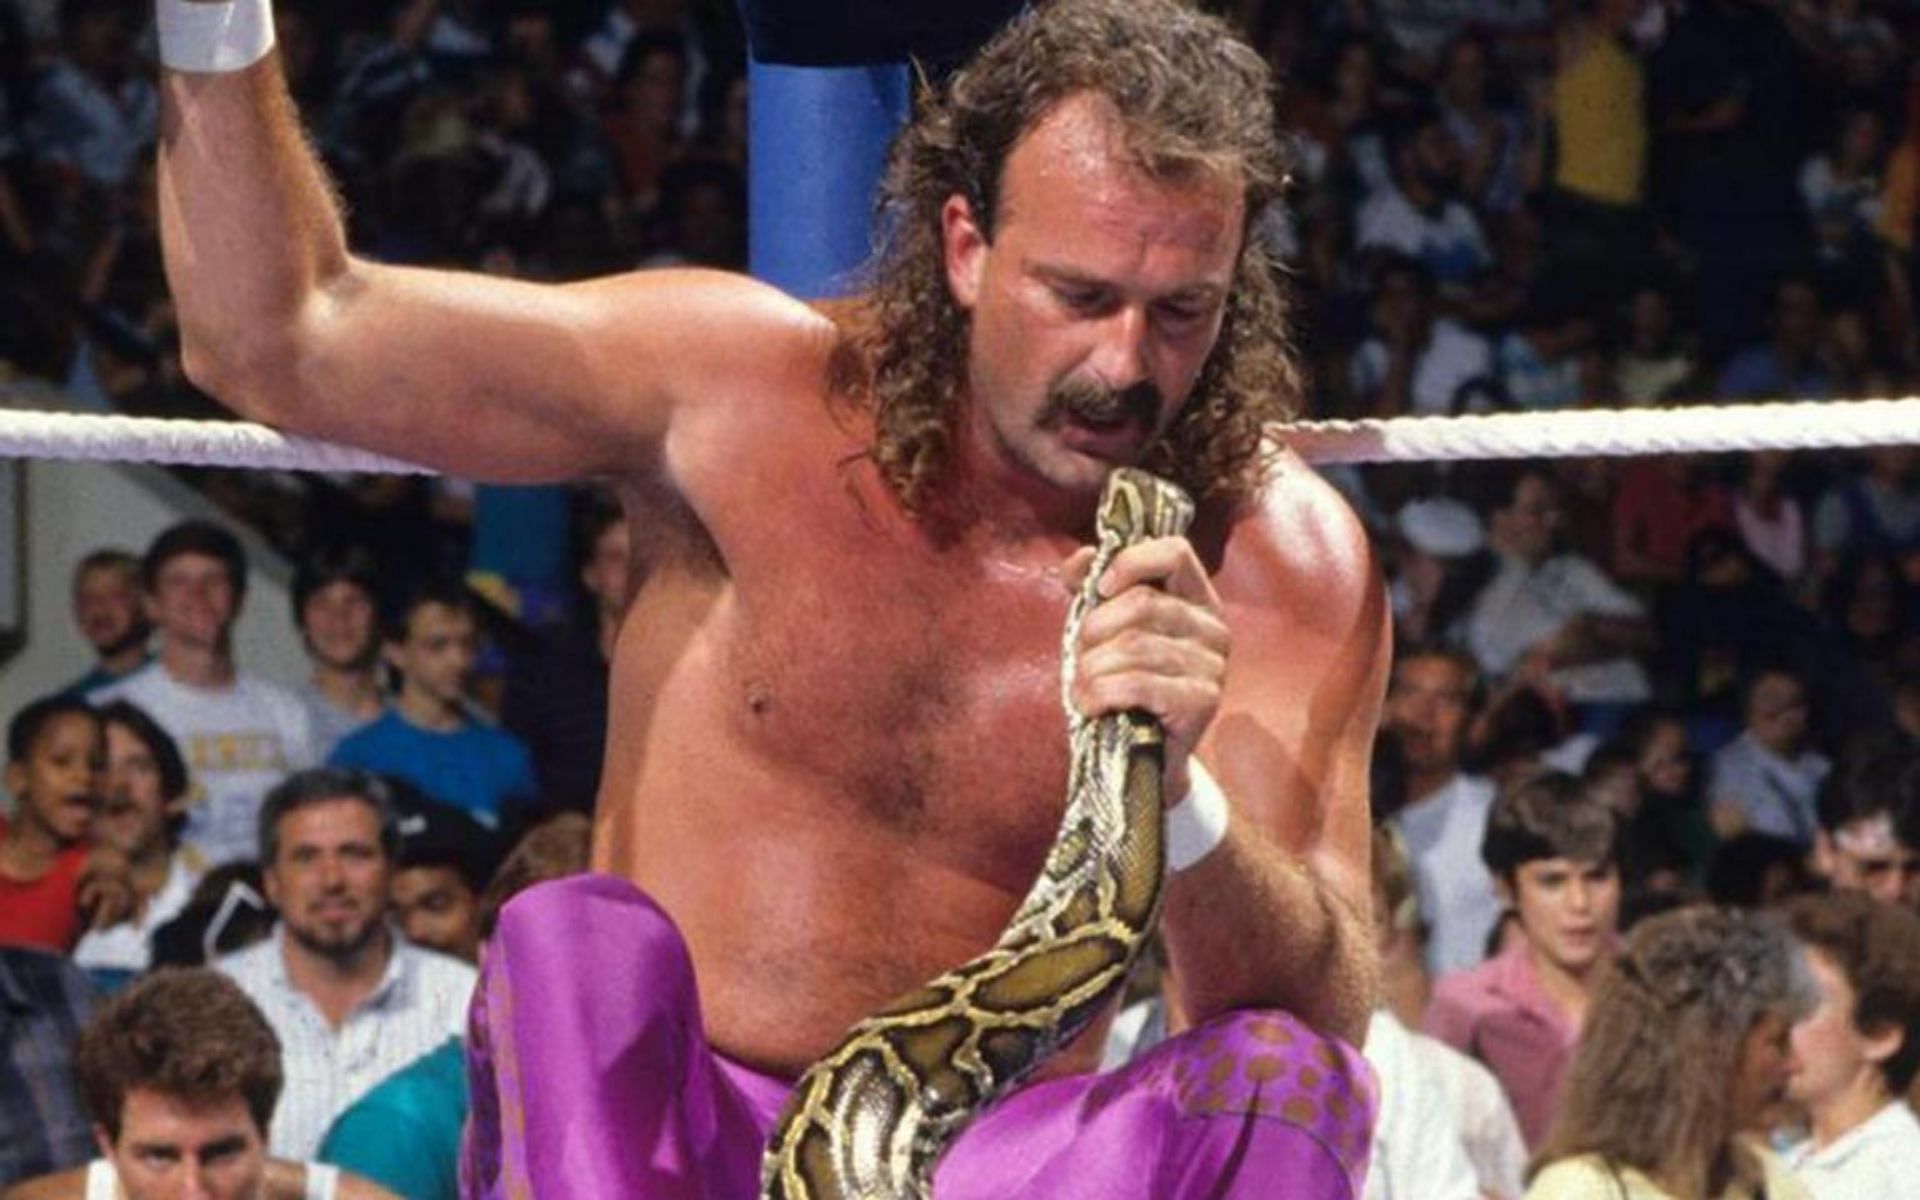 Jake Roberts was inducted into the WWE Hall of Fame as part of the 2014 class.